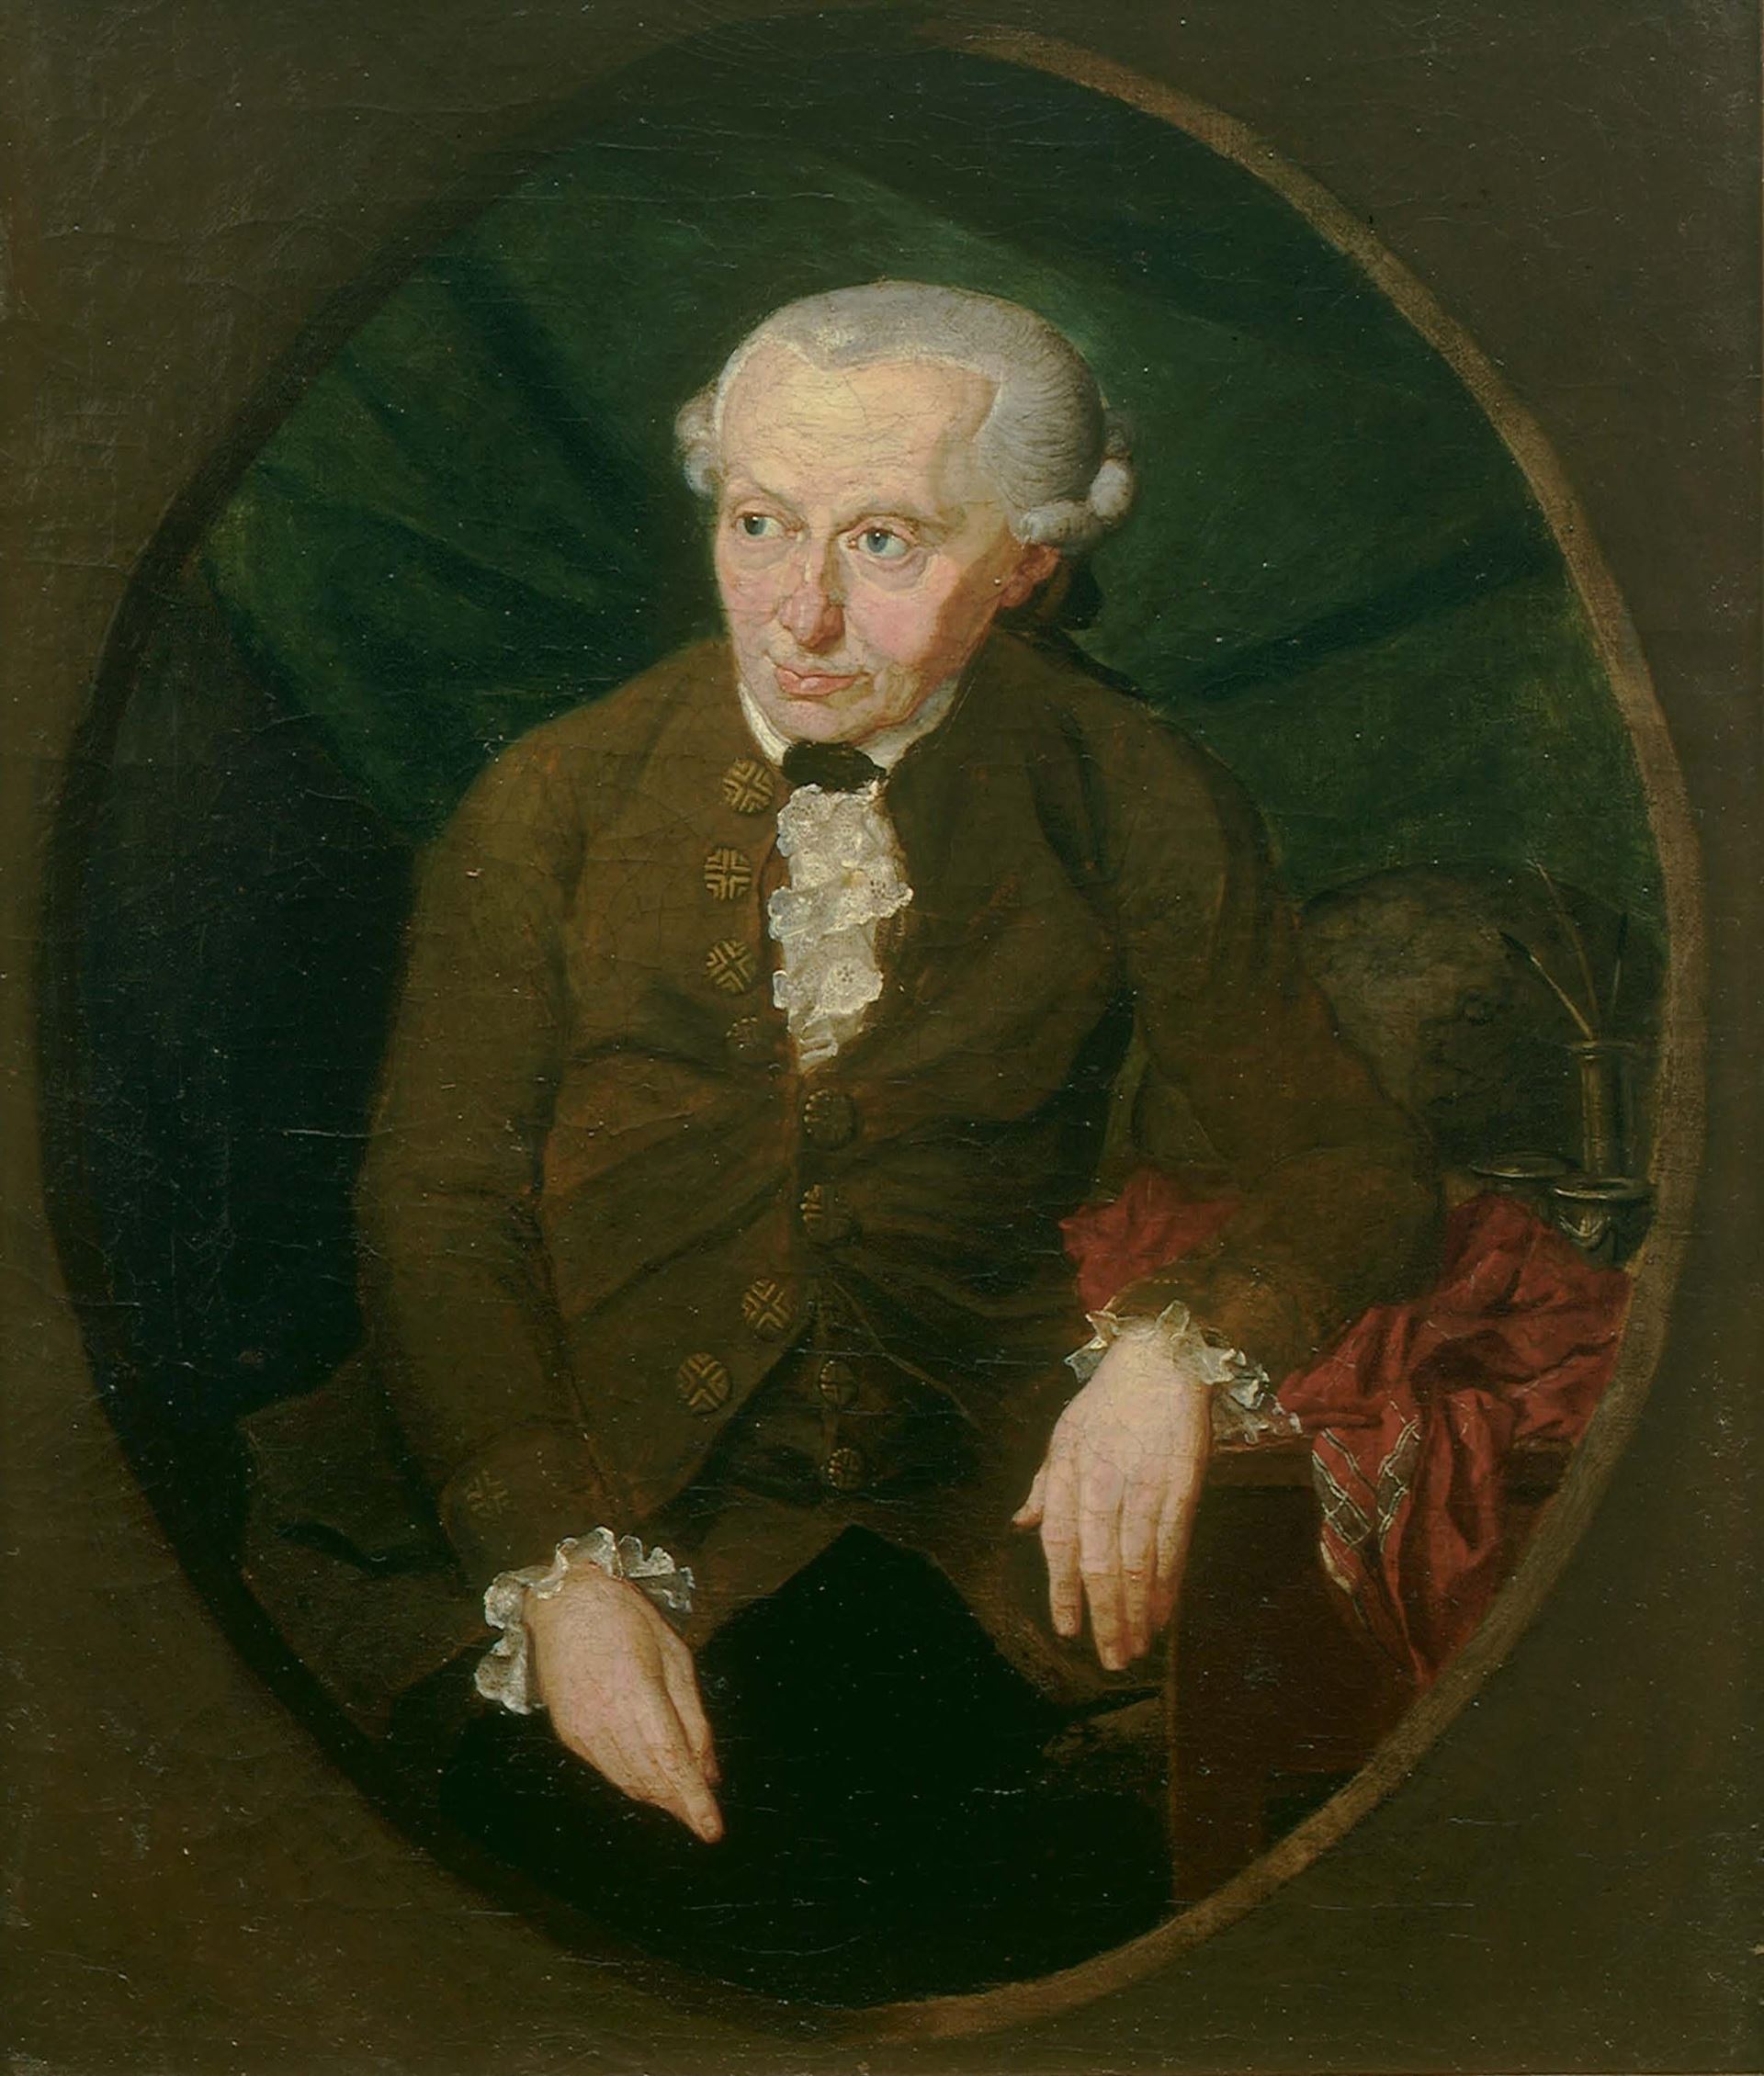 Immanuel Kant painting sitting next to his desk in front of green curtain.